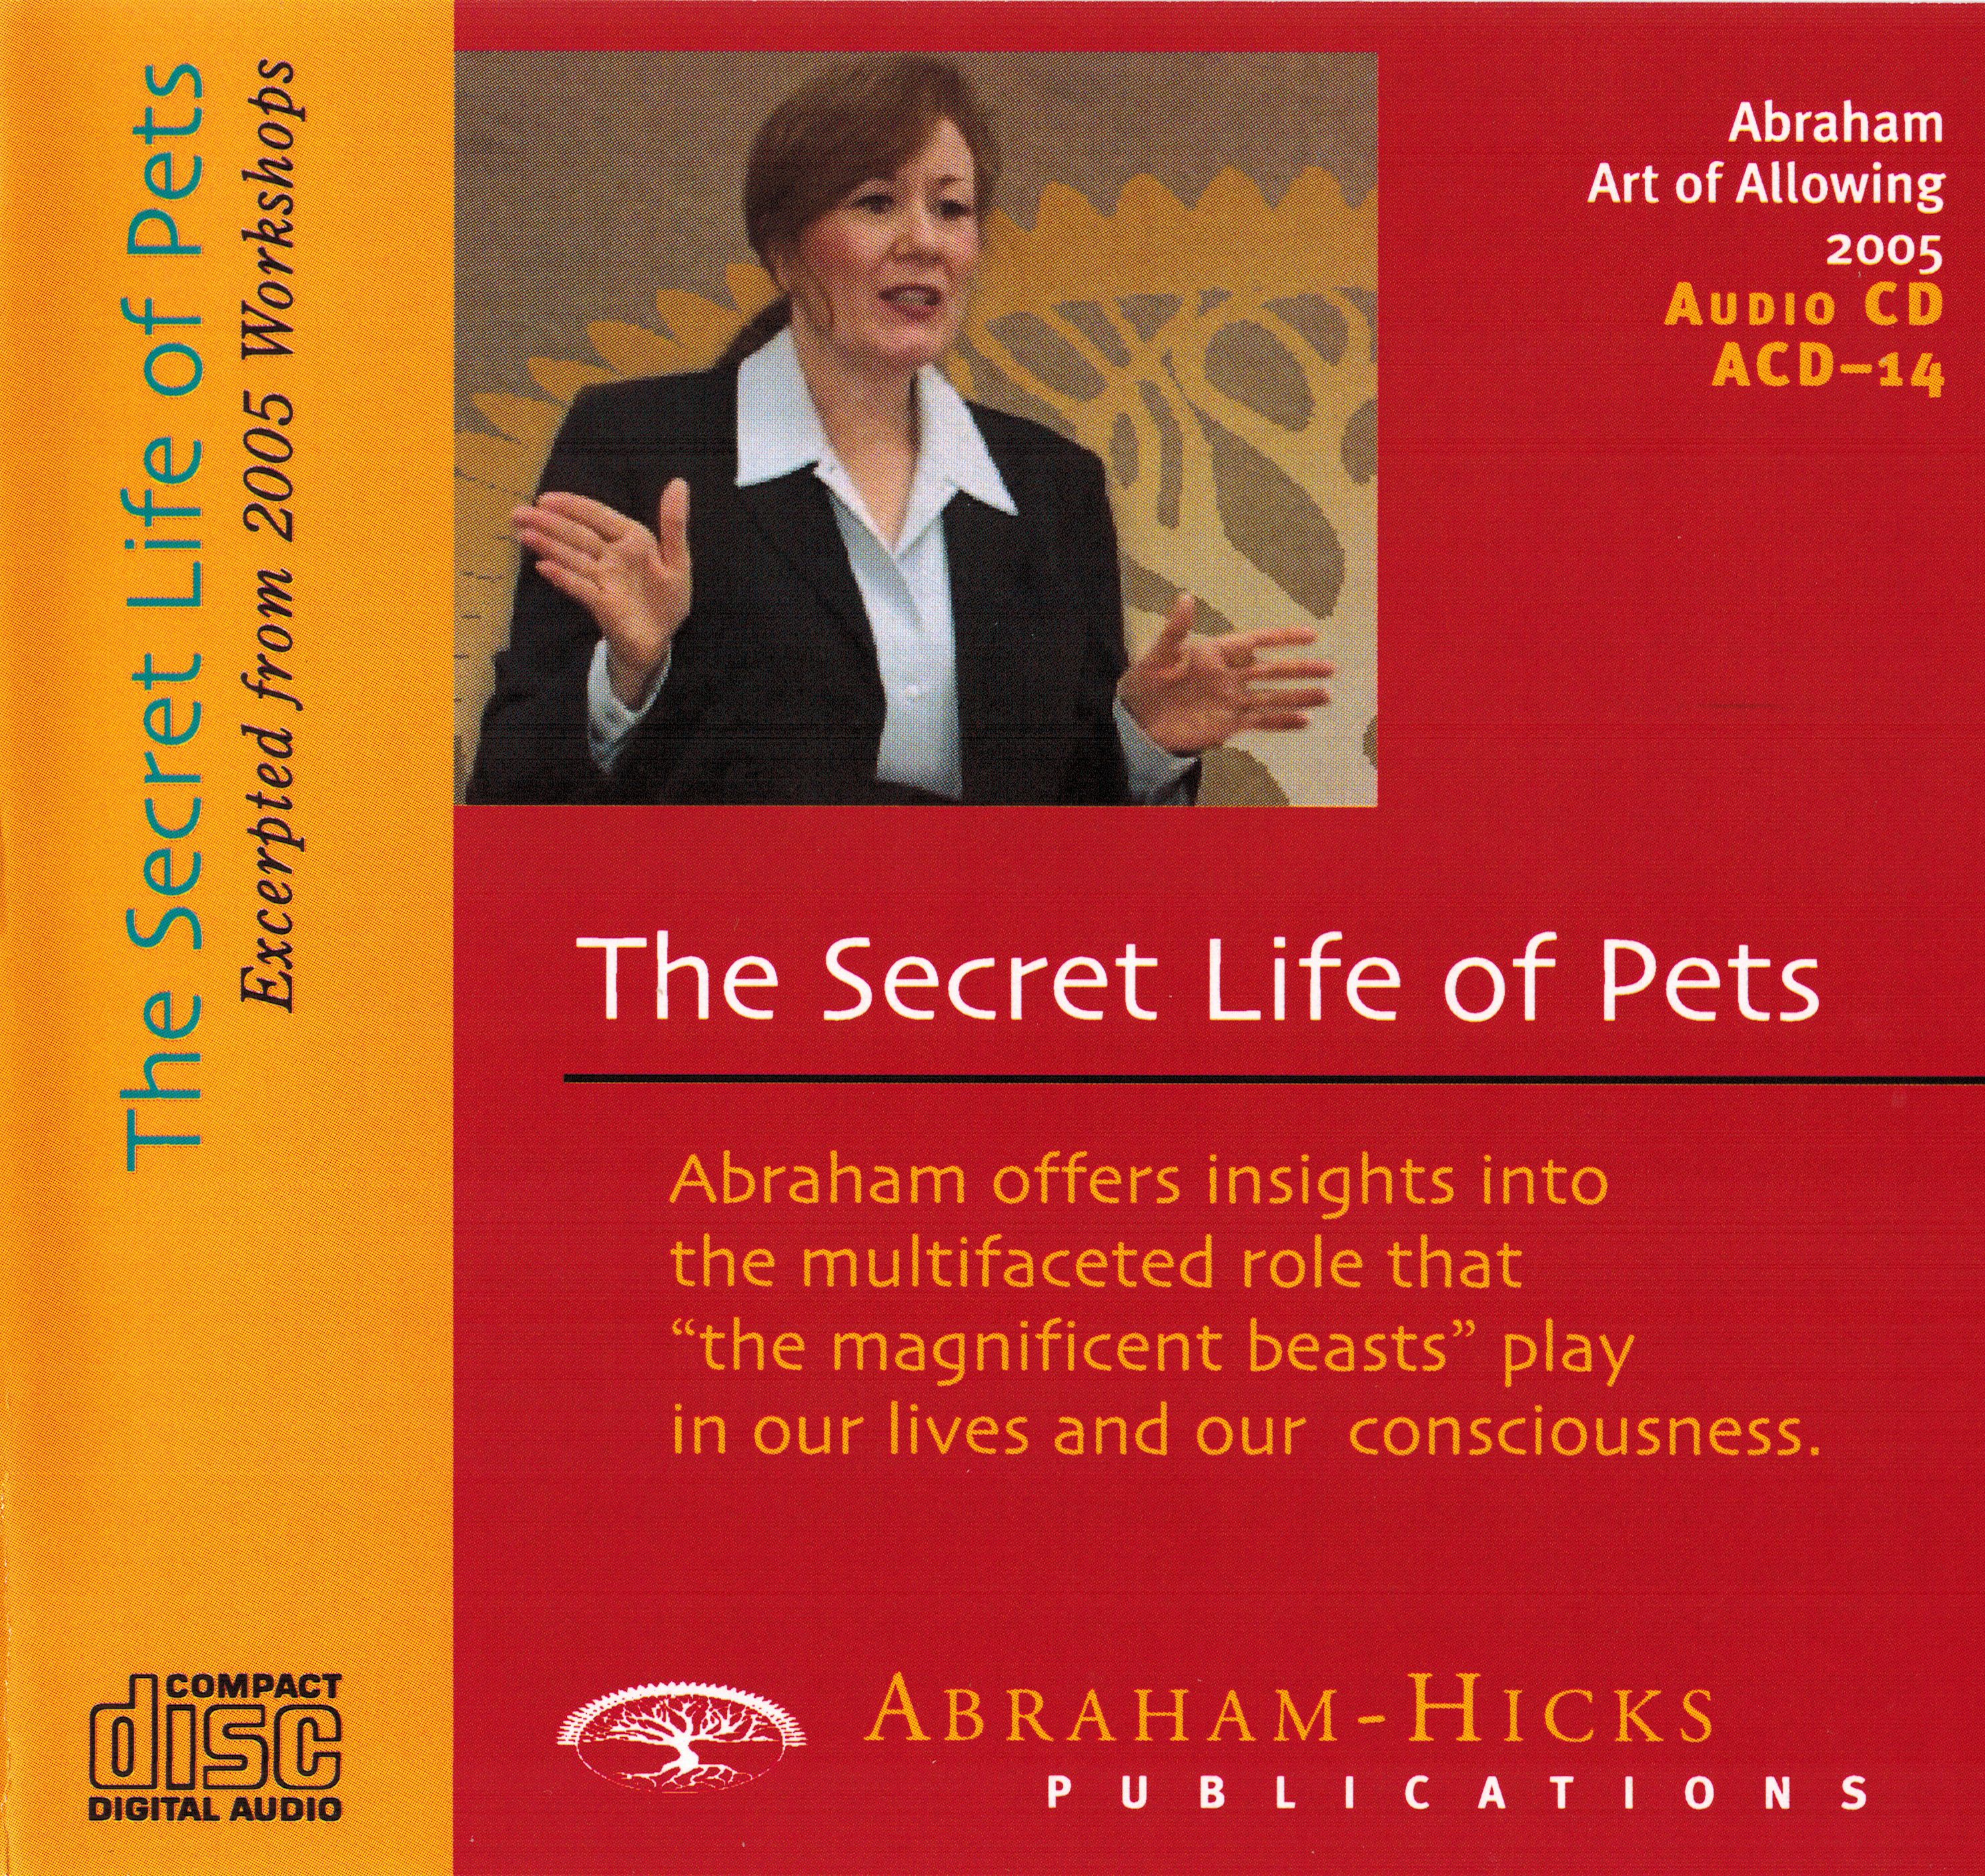 Special Subjects MP3: The Secret Lives of Pets